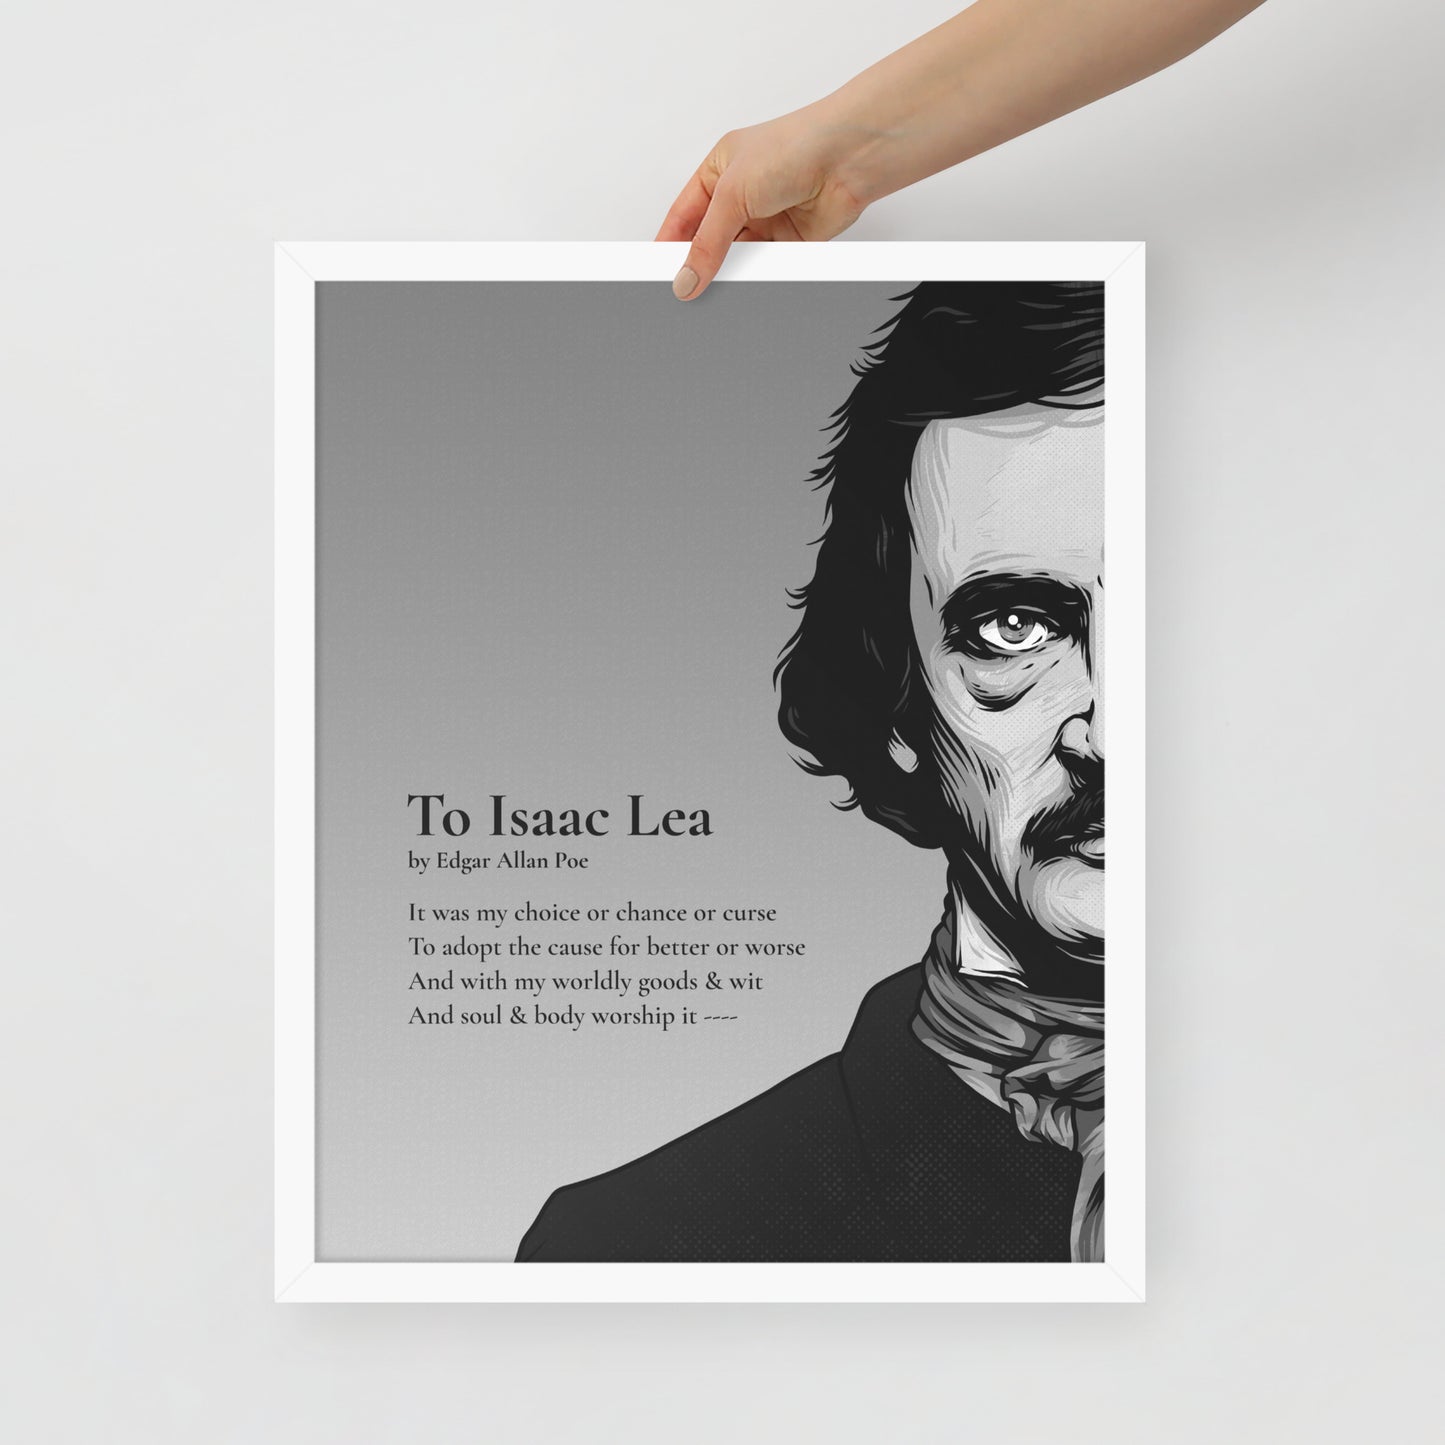 Edgar Allan Poe's 'To Isaac Lea' Framed Matted Poster - 16 x 20 White Frame